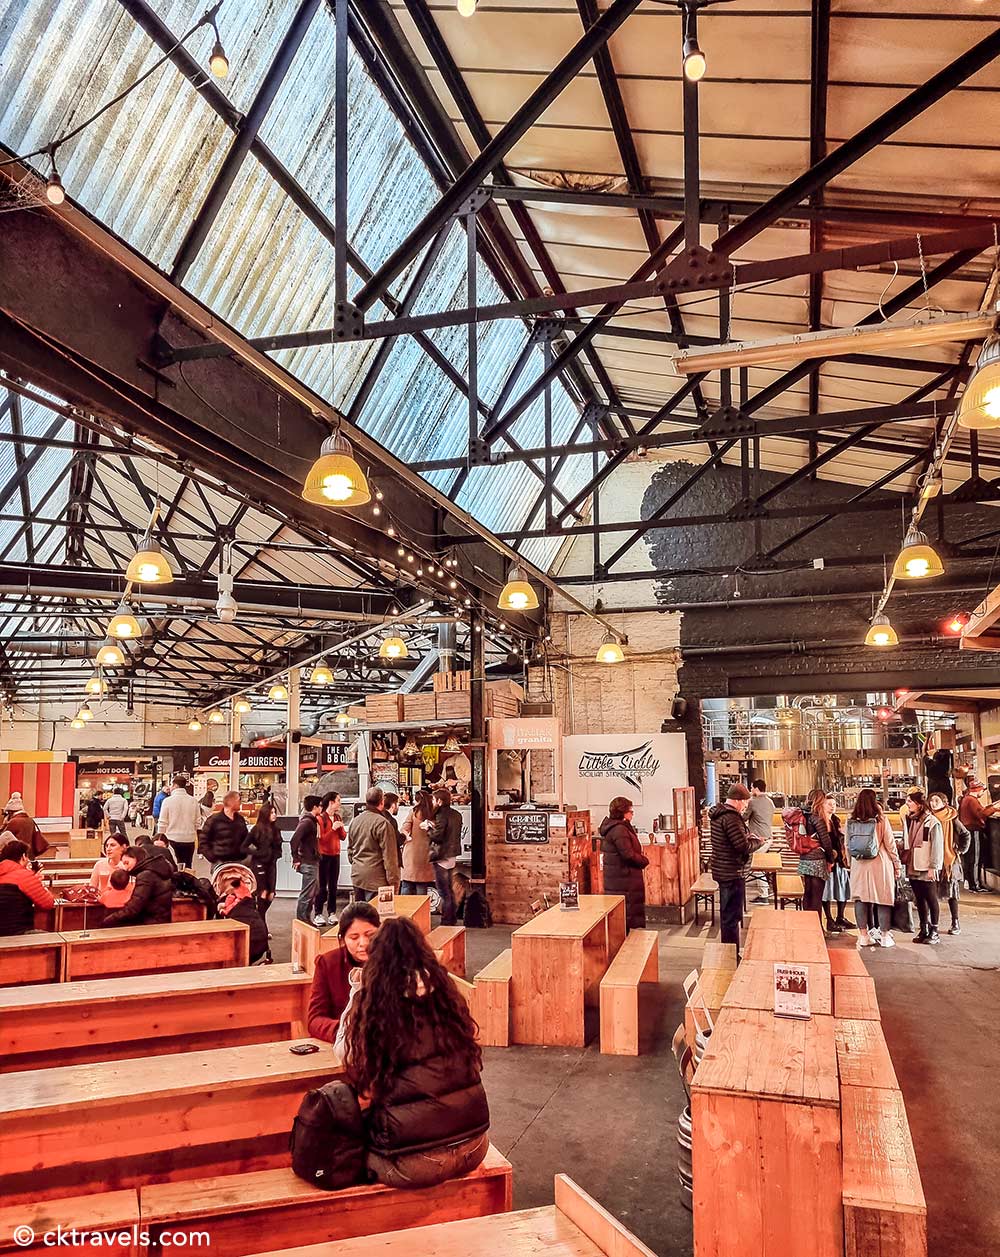 Elephant & Castle area guide – Restaurants, pubs and things in SE1